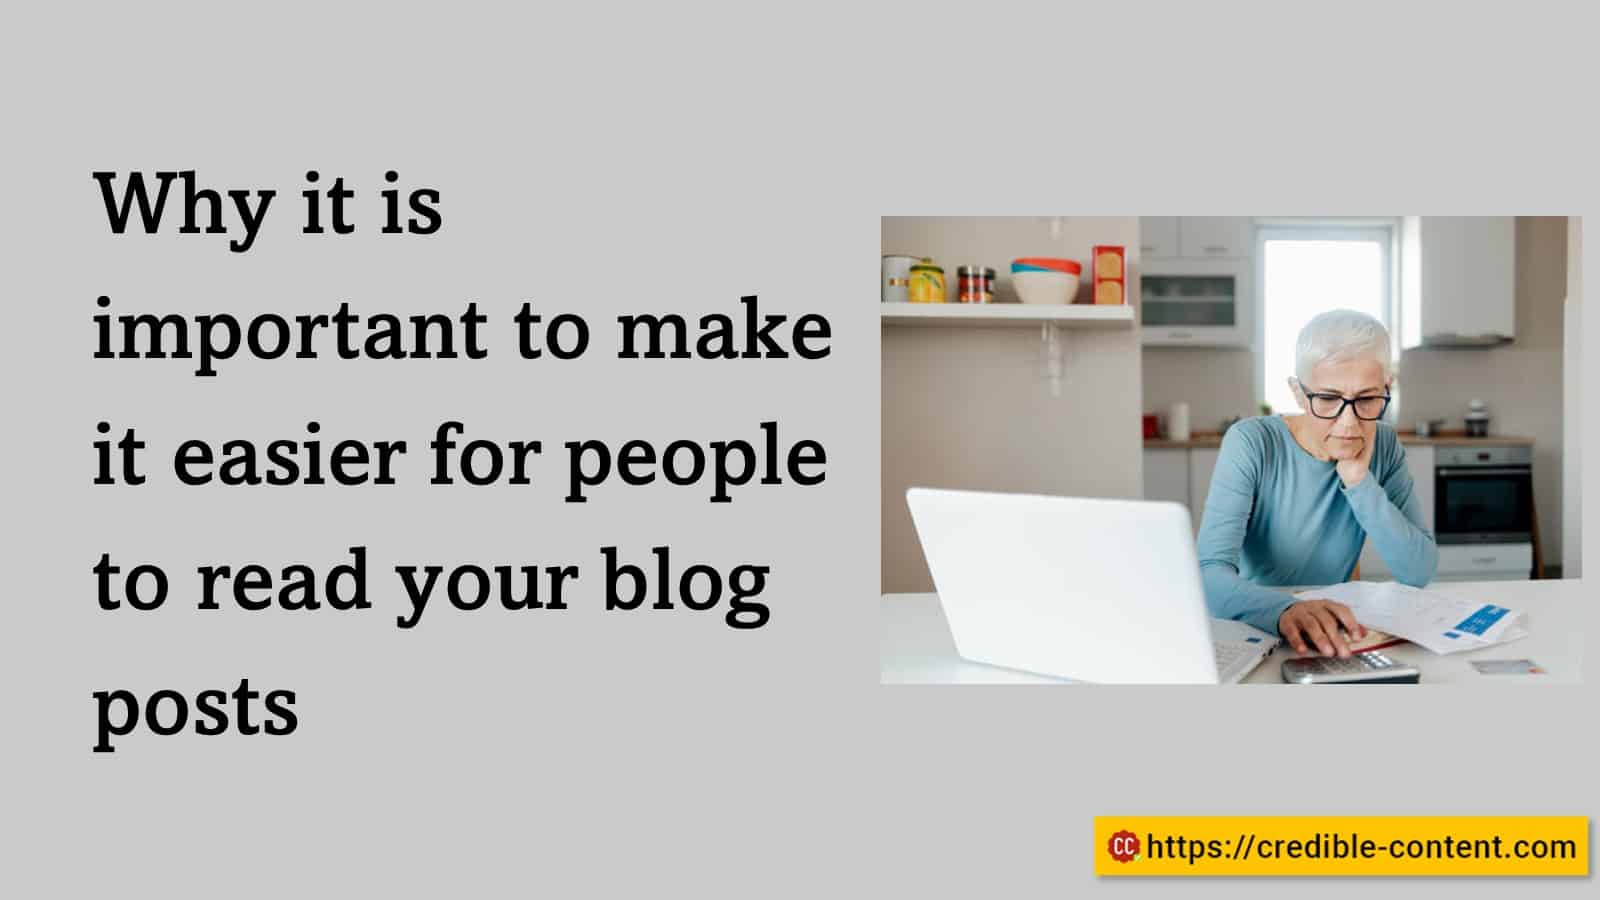 Why it is important to make it easier for people to read your blog posts